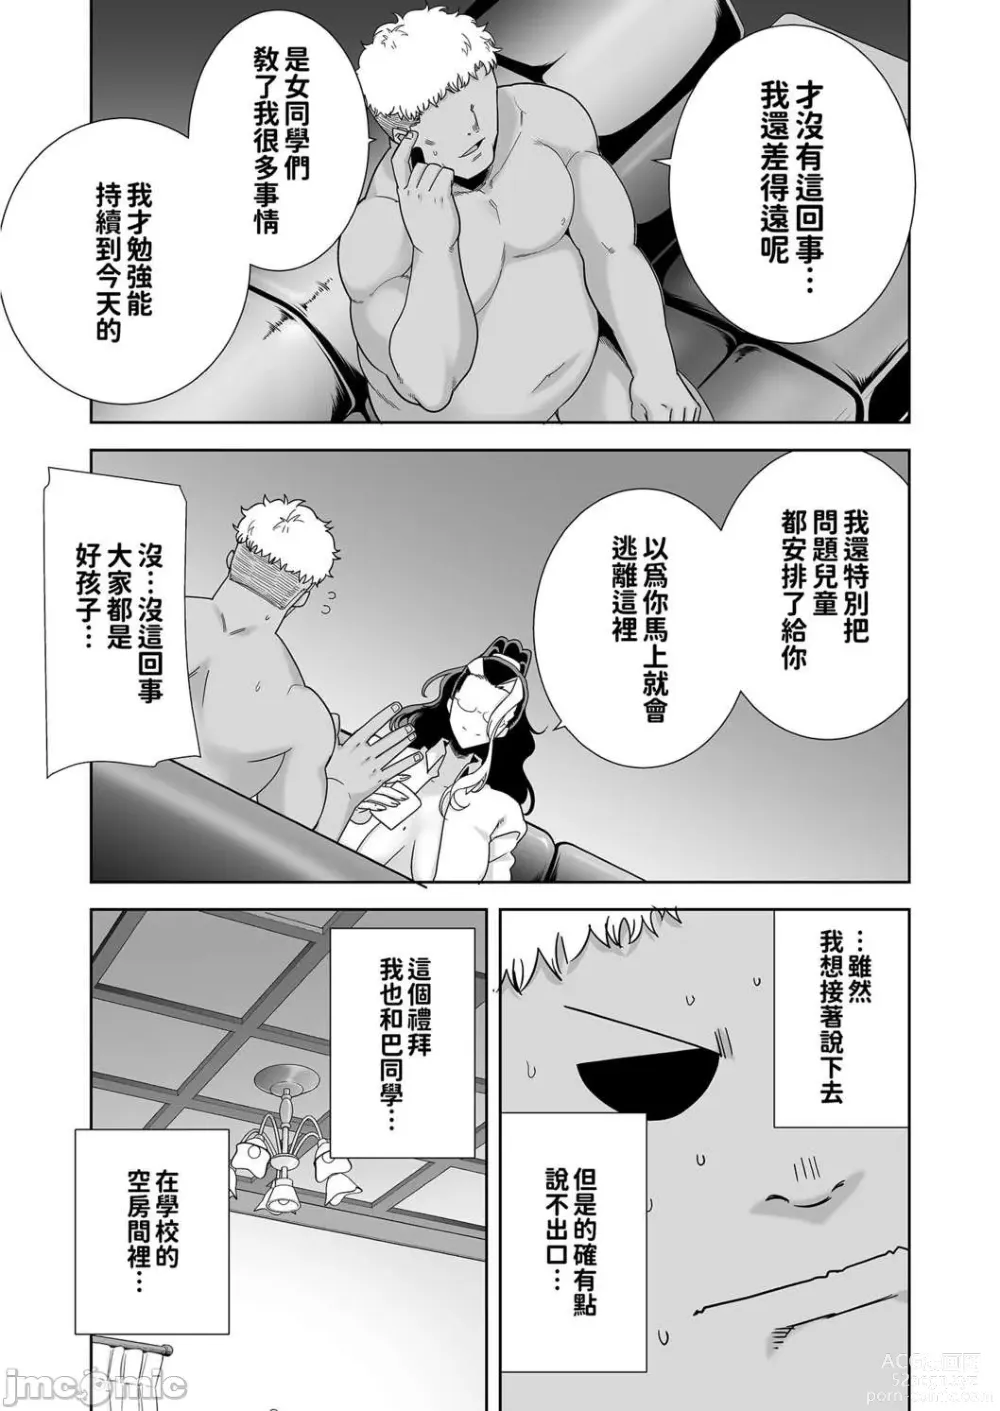 Page 11 of doujinshi 聖華女学院高等部公認竿おじさん 5